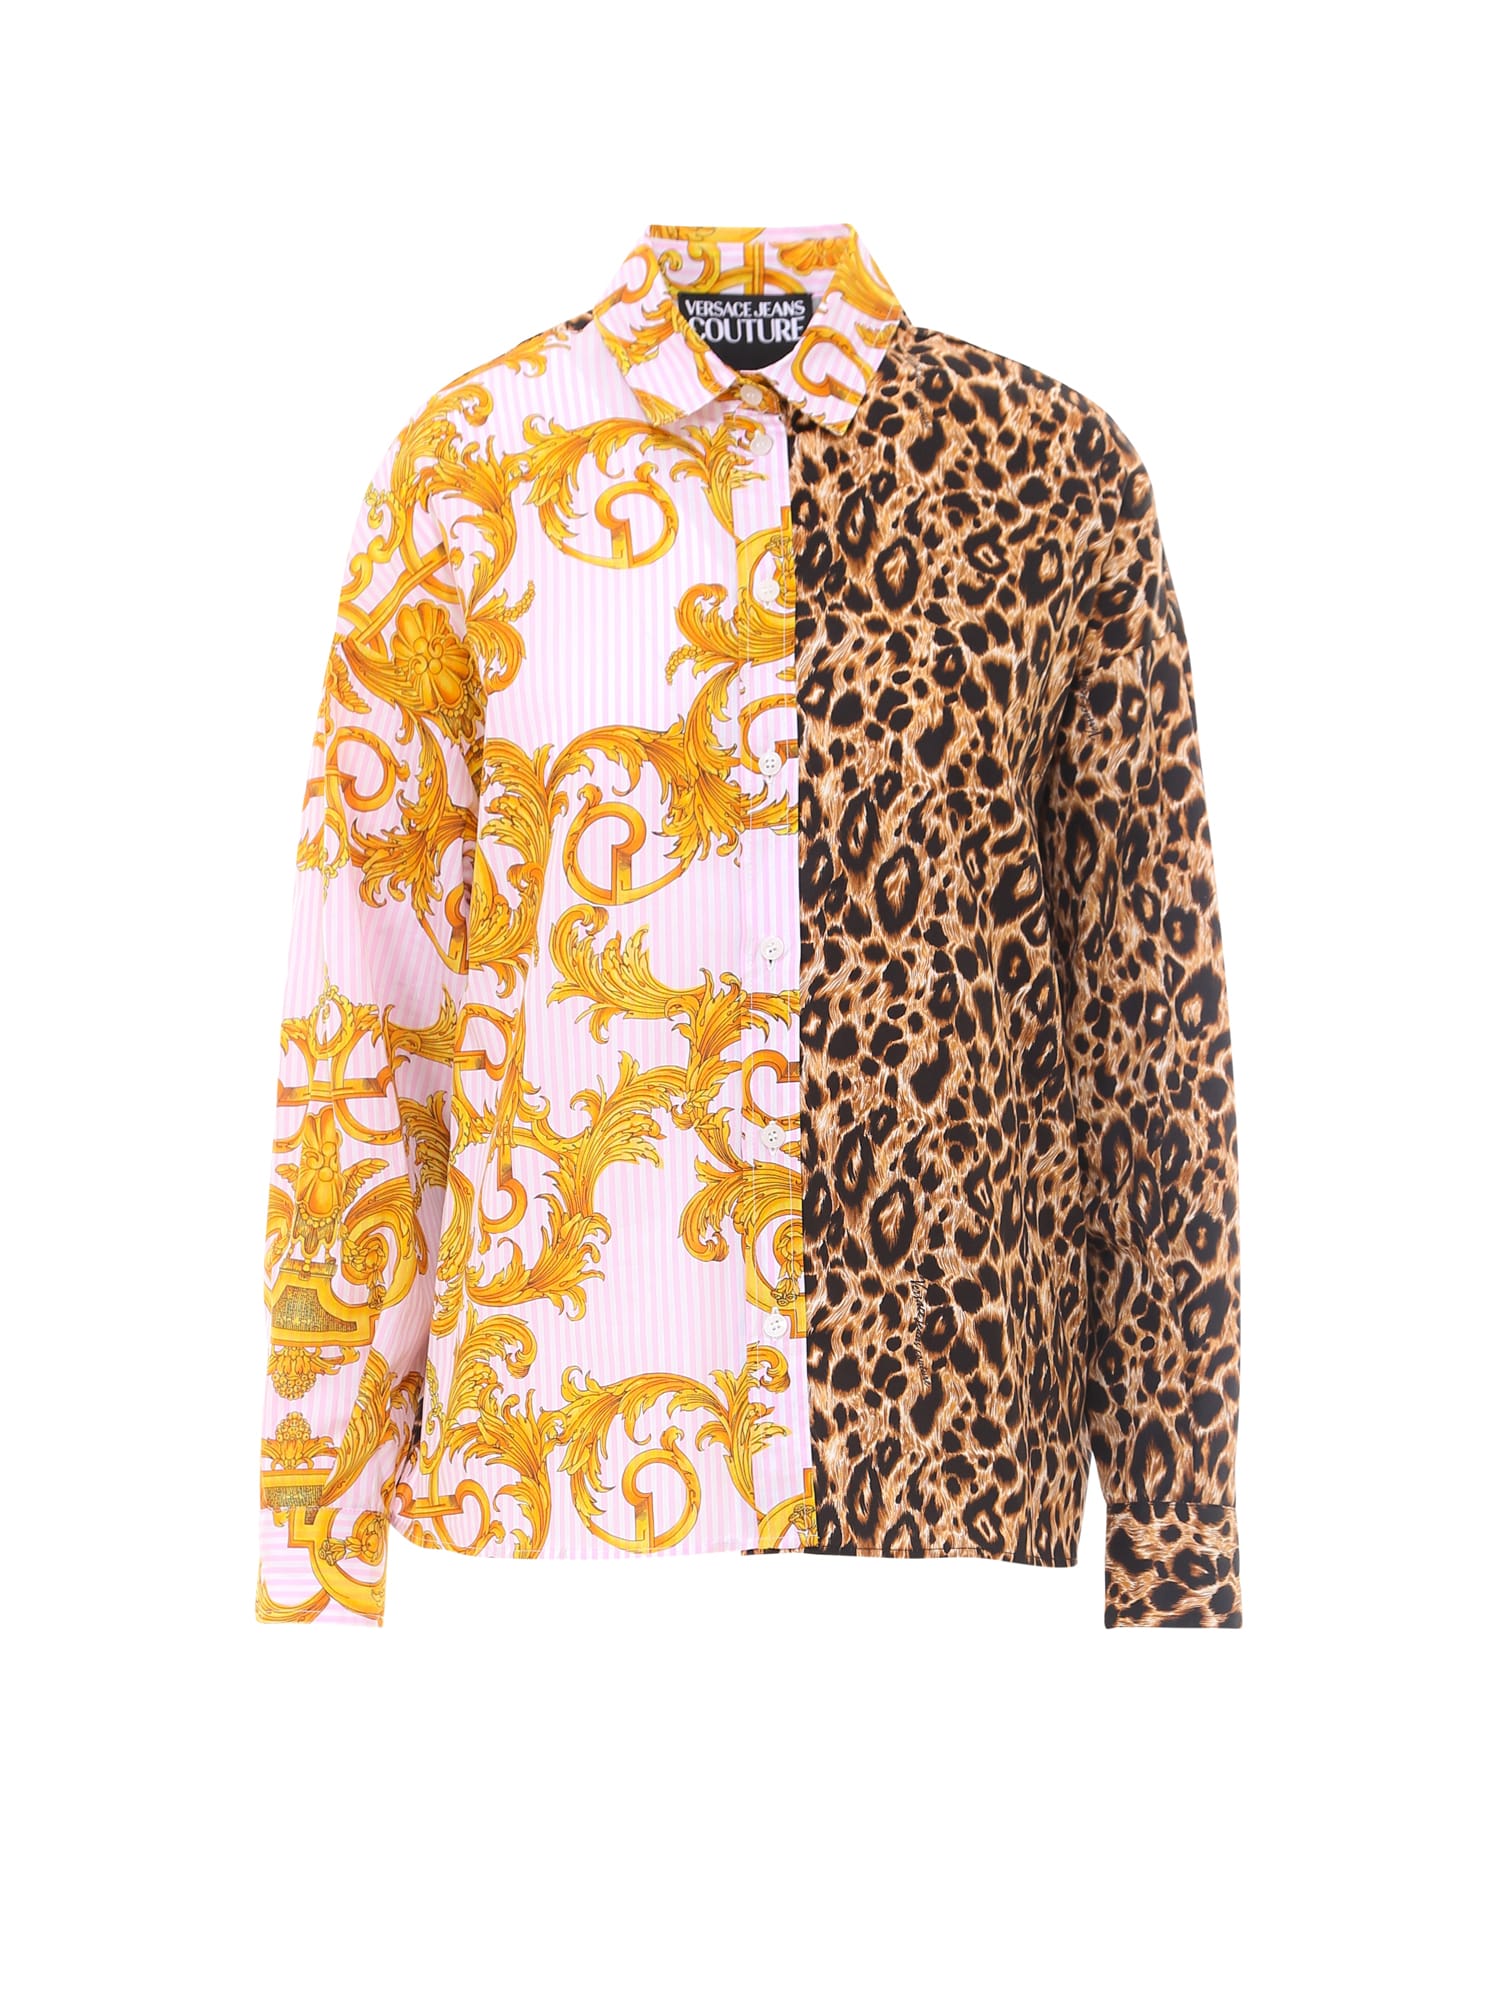 VERSACE JEANS COUTURE SHIRT,11517507